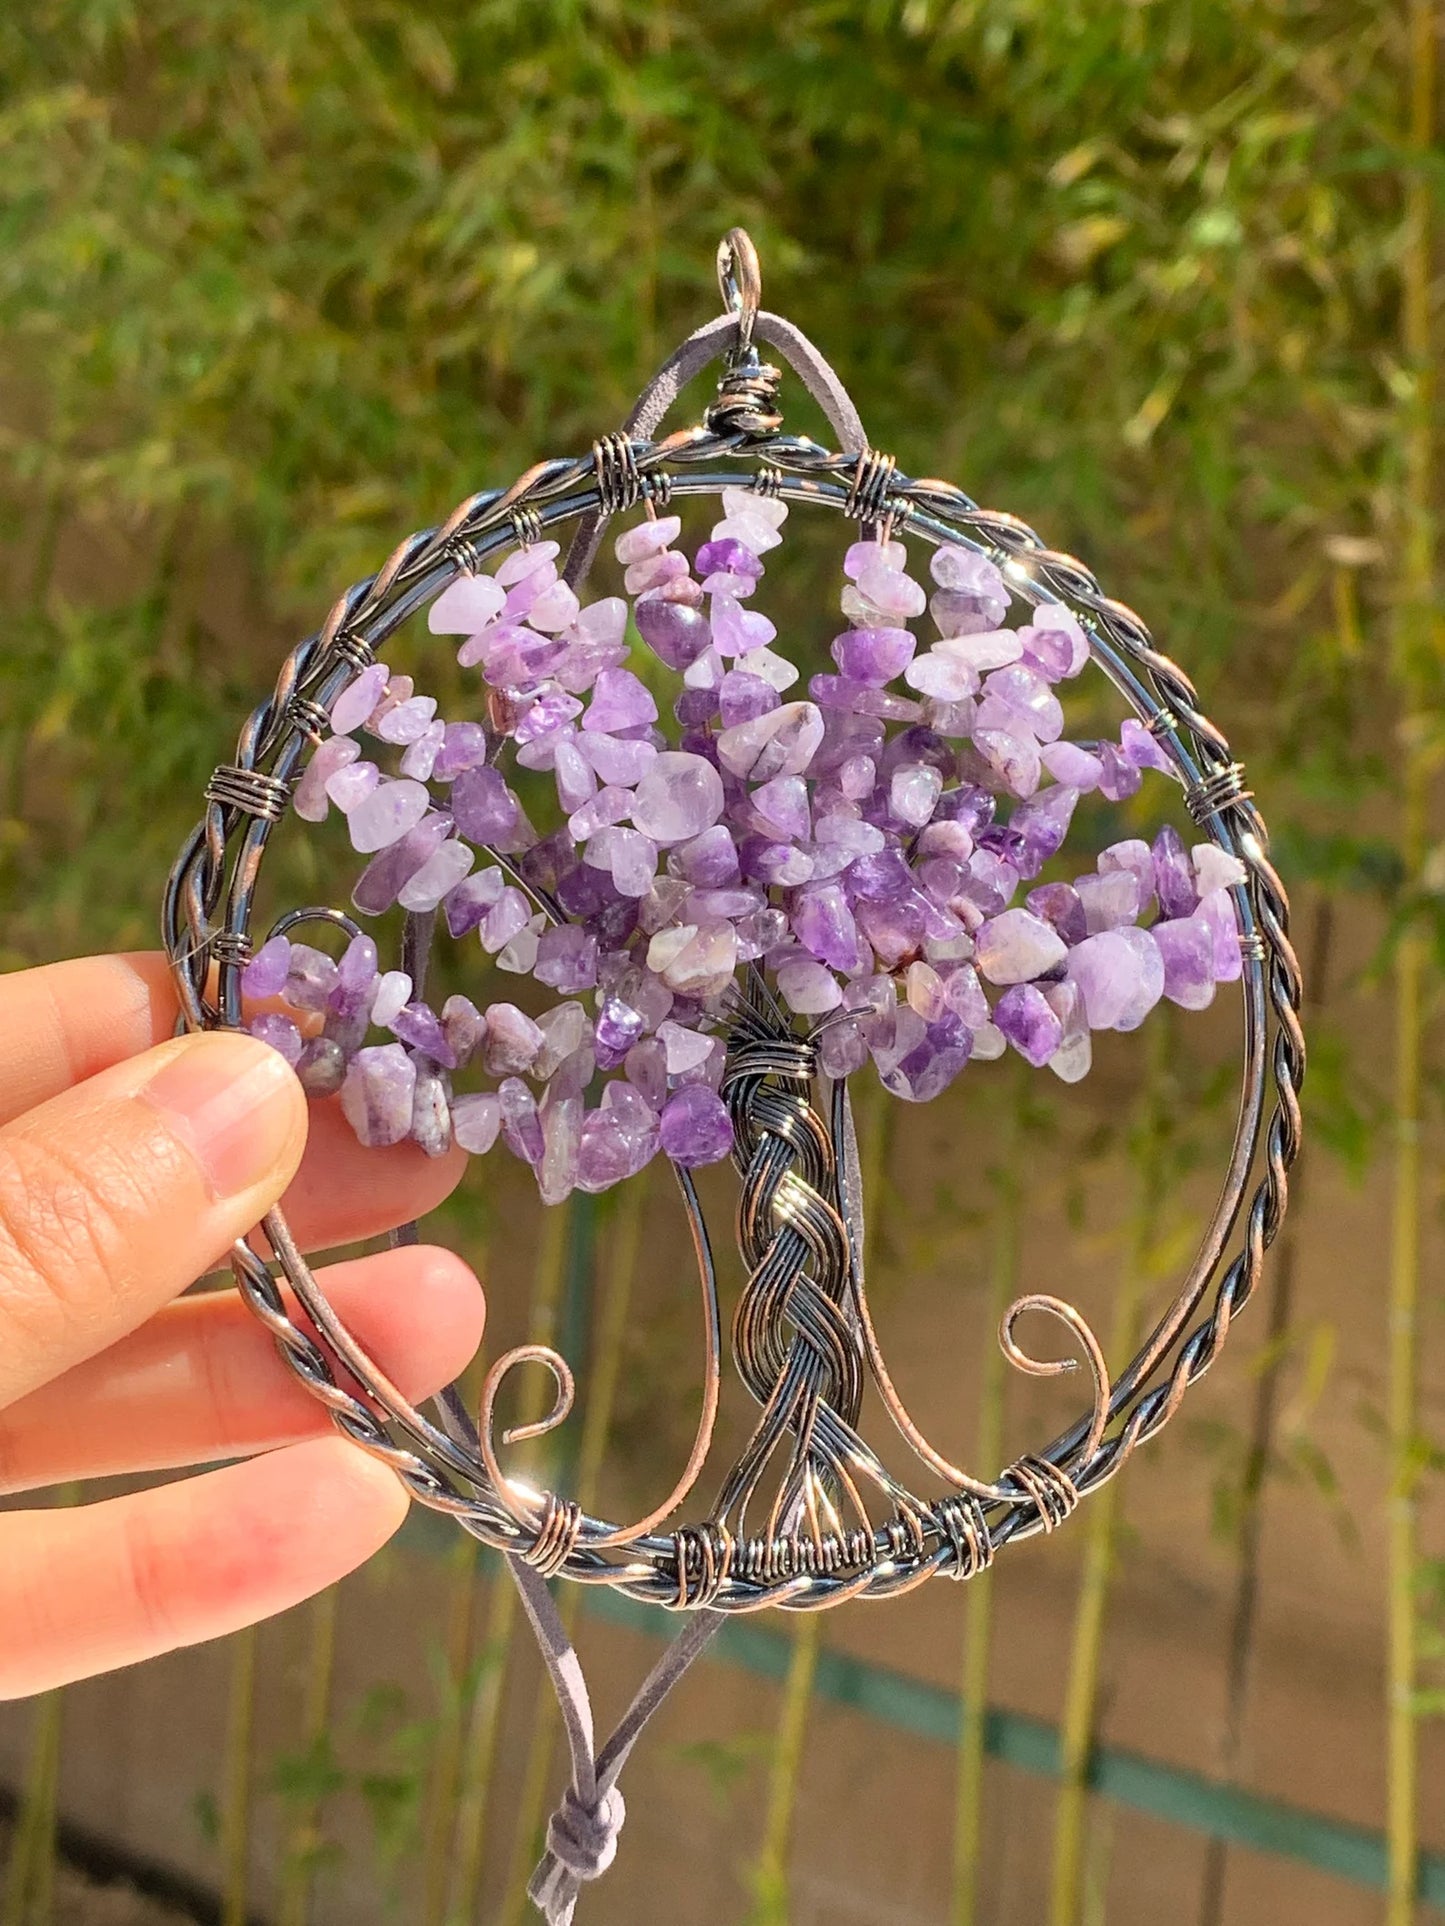 Amethyst Healing Crystal Stone Hanging Ornament Home Indoor Decoration